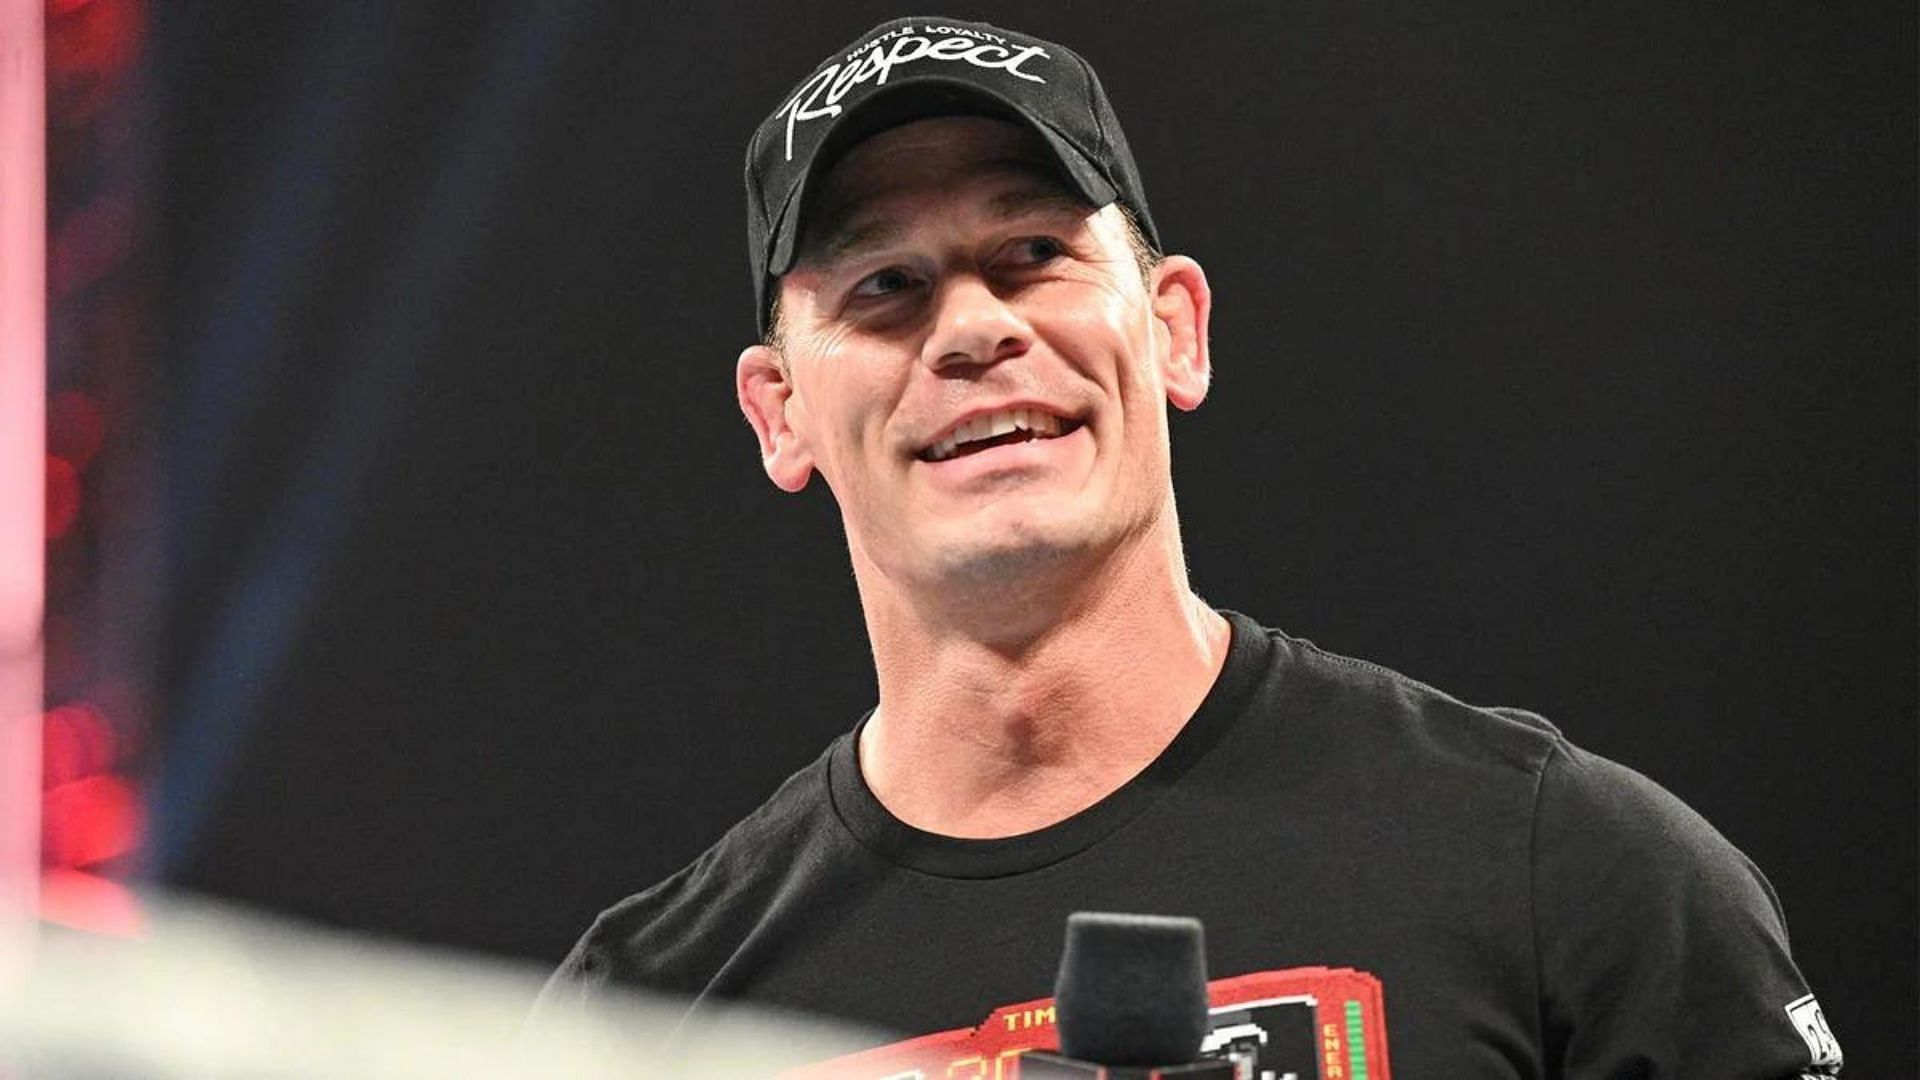 John Cena tweeted out a short message ahead of his WWE return